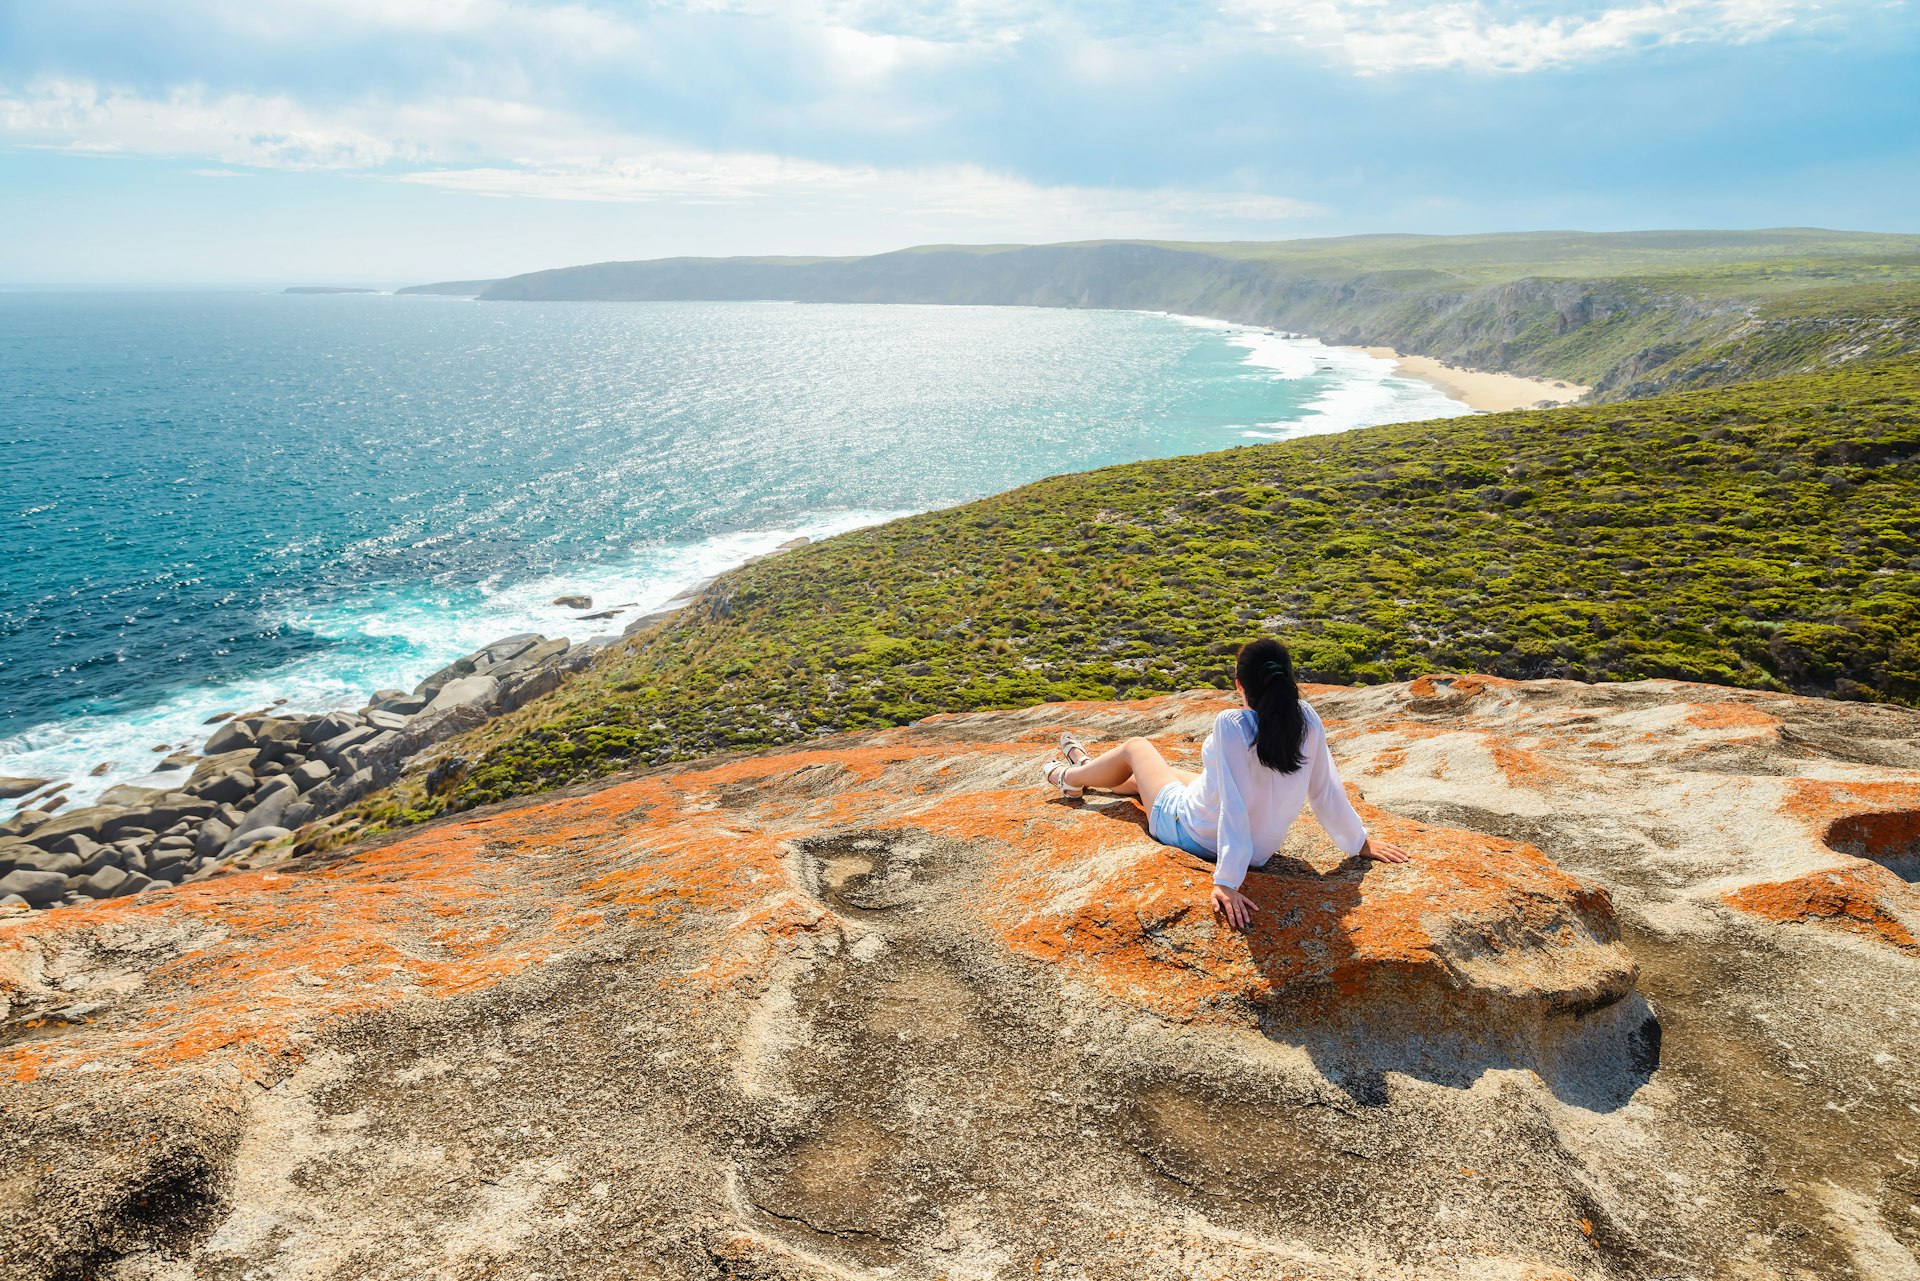 Woman enjoying the scenery while sitting on the edge of the cliff at Remarkable Rocks, Kangaroo Island, South Australia.